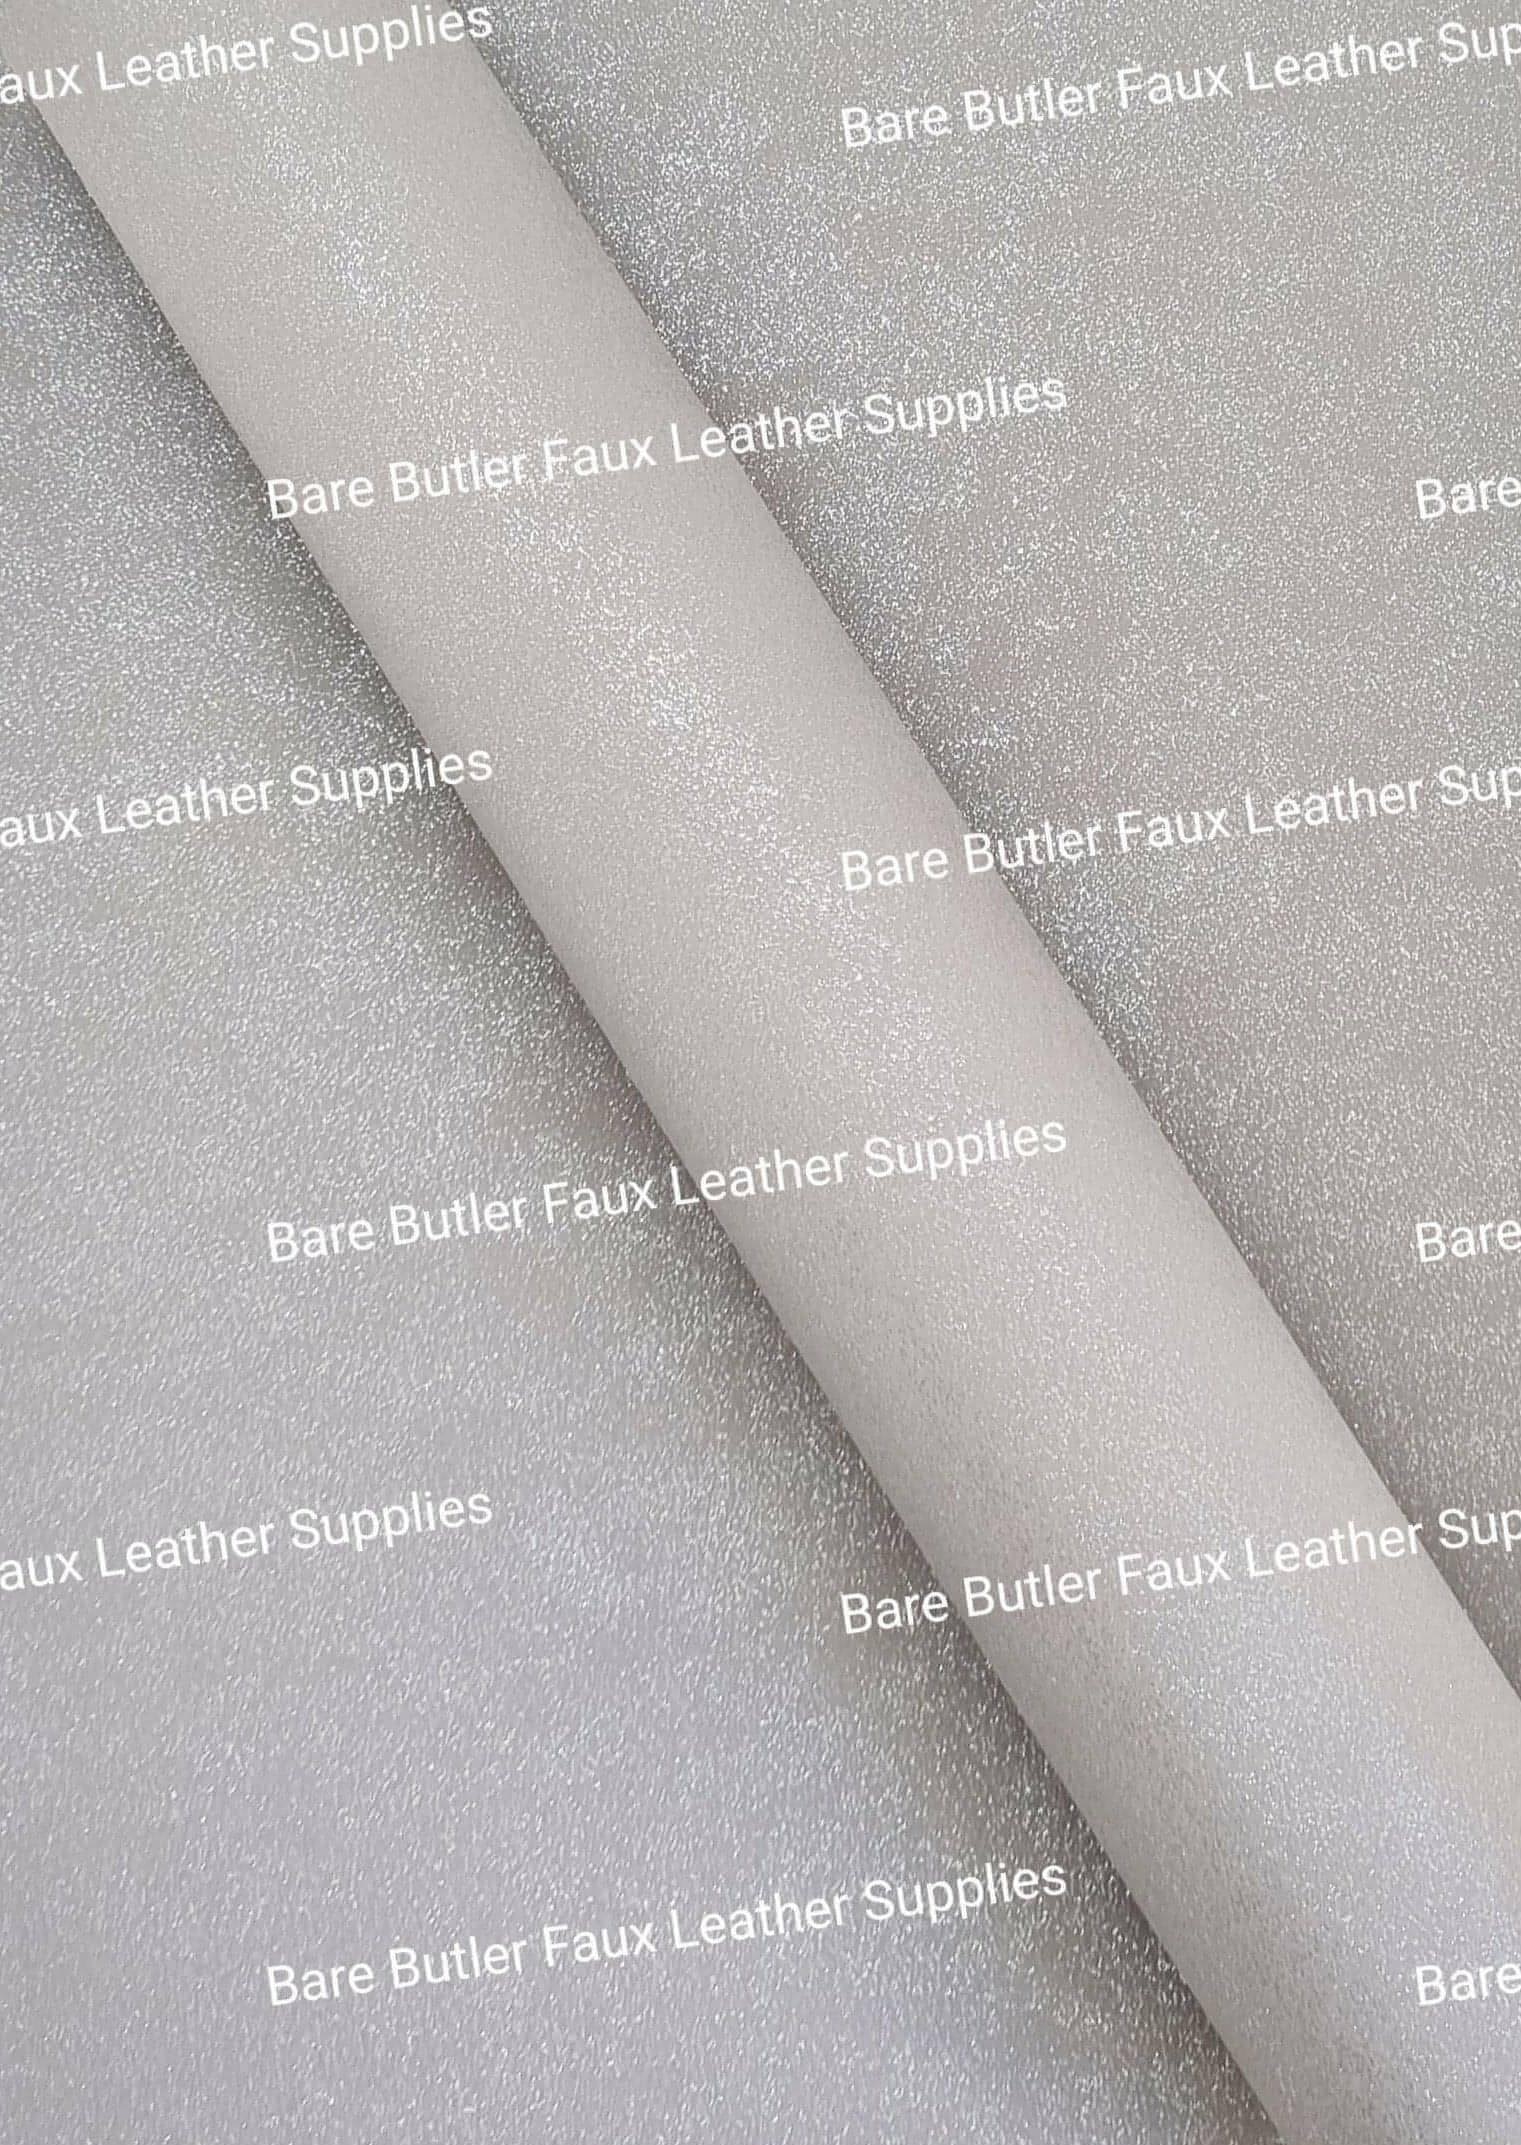 Glitter Suede - Grey - Faux, Faux Leather, Glitter, grey, Suede - Bare Butler Faux Leather Supplies 